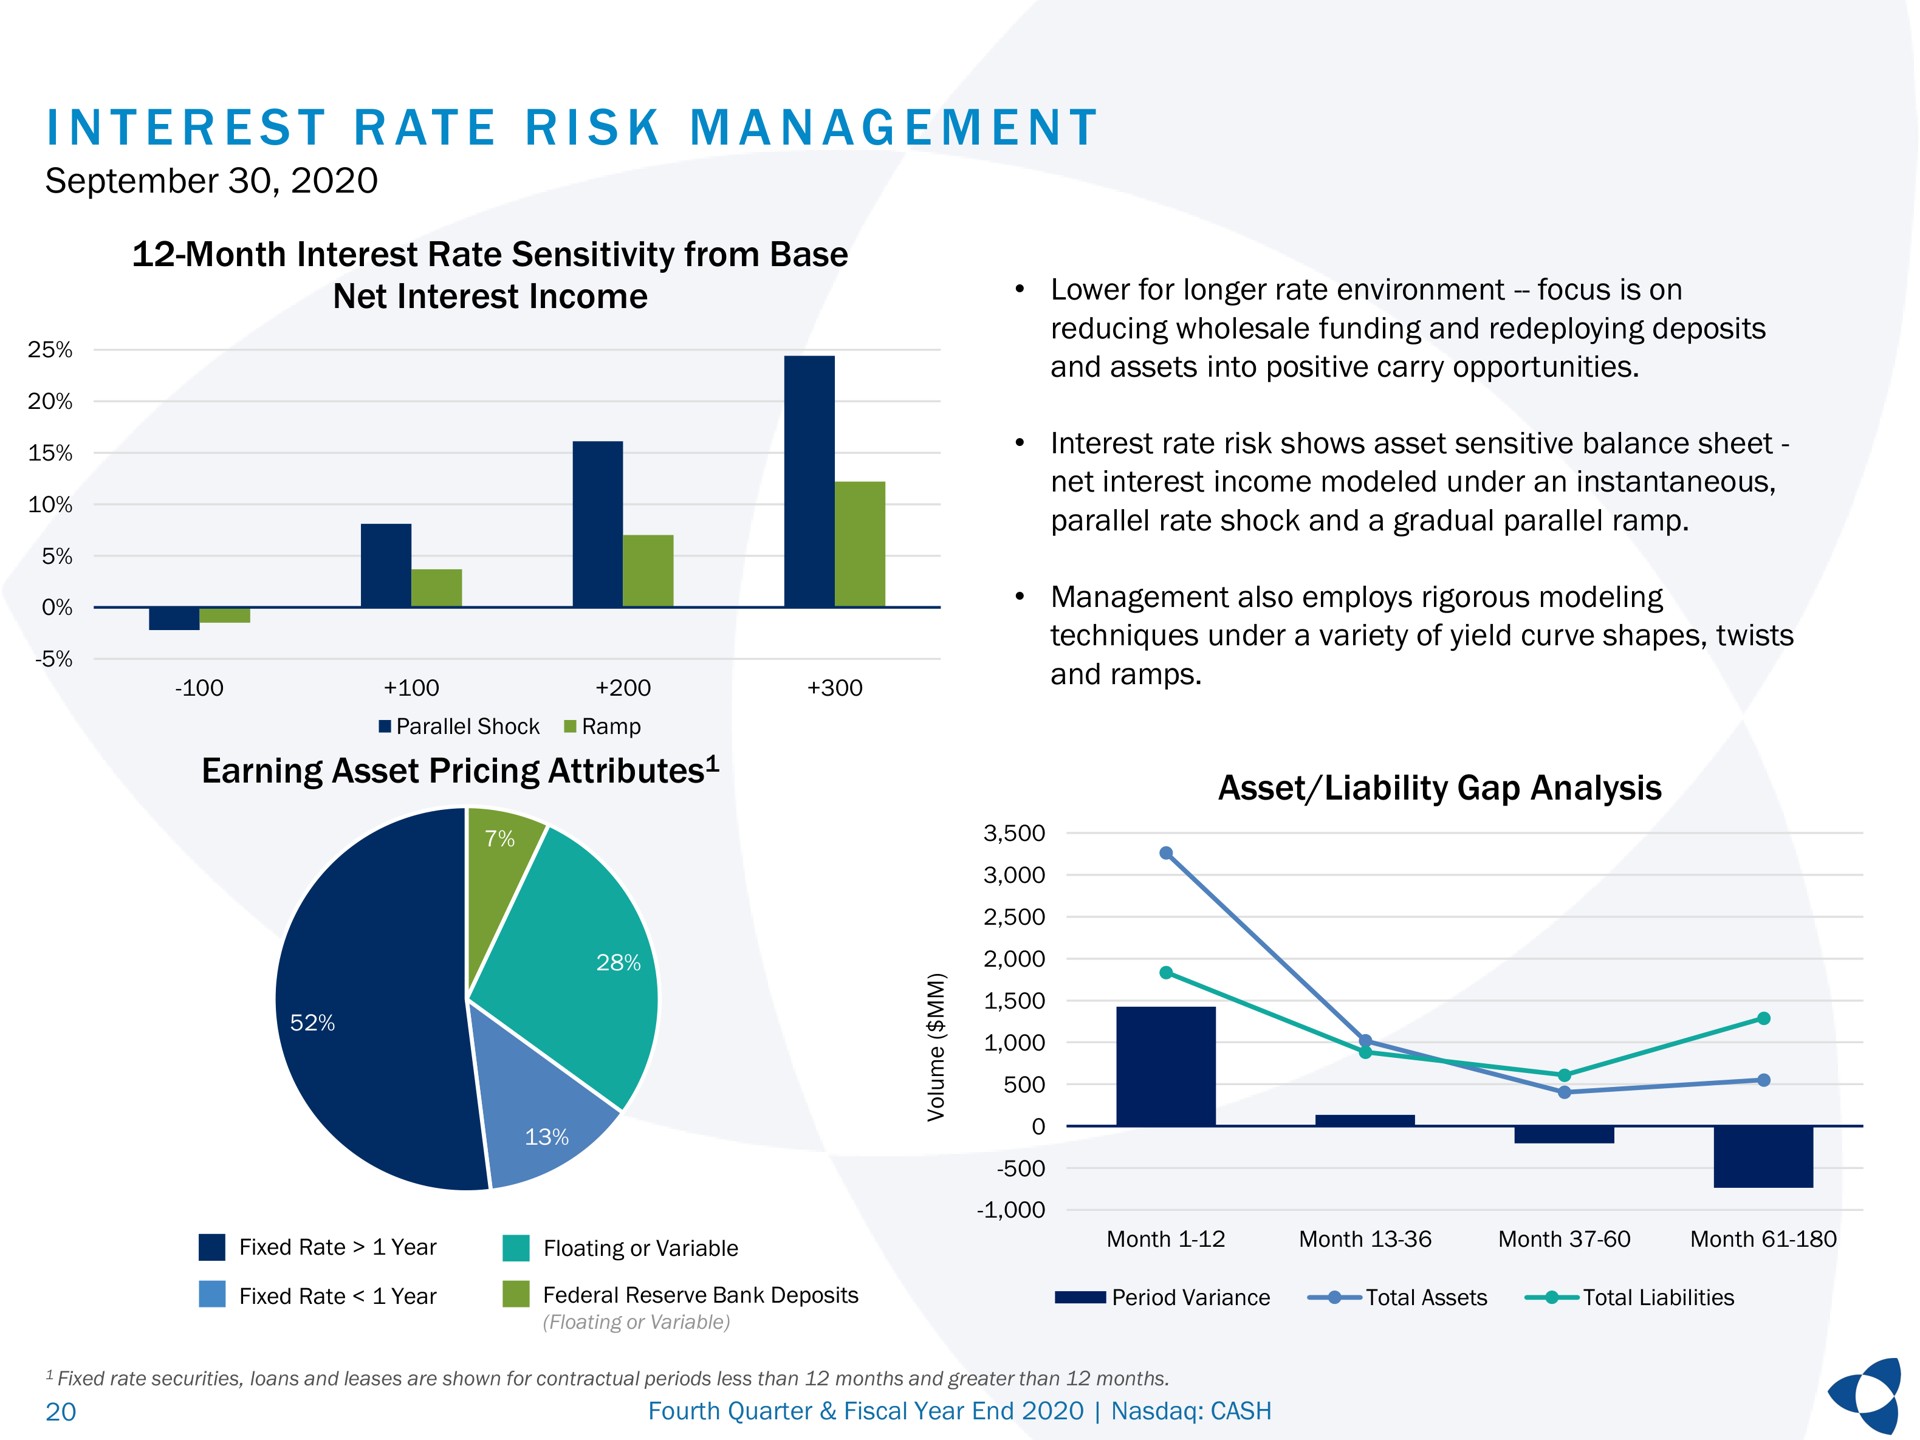 i at i a a month interest rate sensitivity from base net interest income earning asset pricing attributes asset liability gap analysis risk management lower for longer environment focus is on risk shows sensitive balance sheet attributes | Pathward Financial